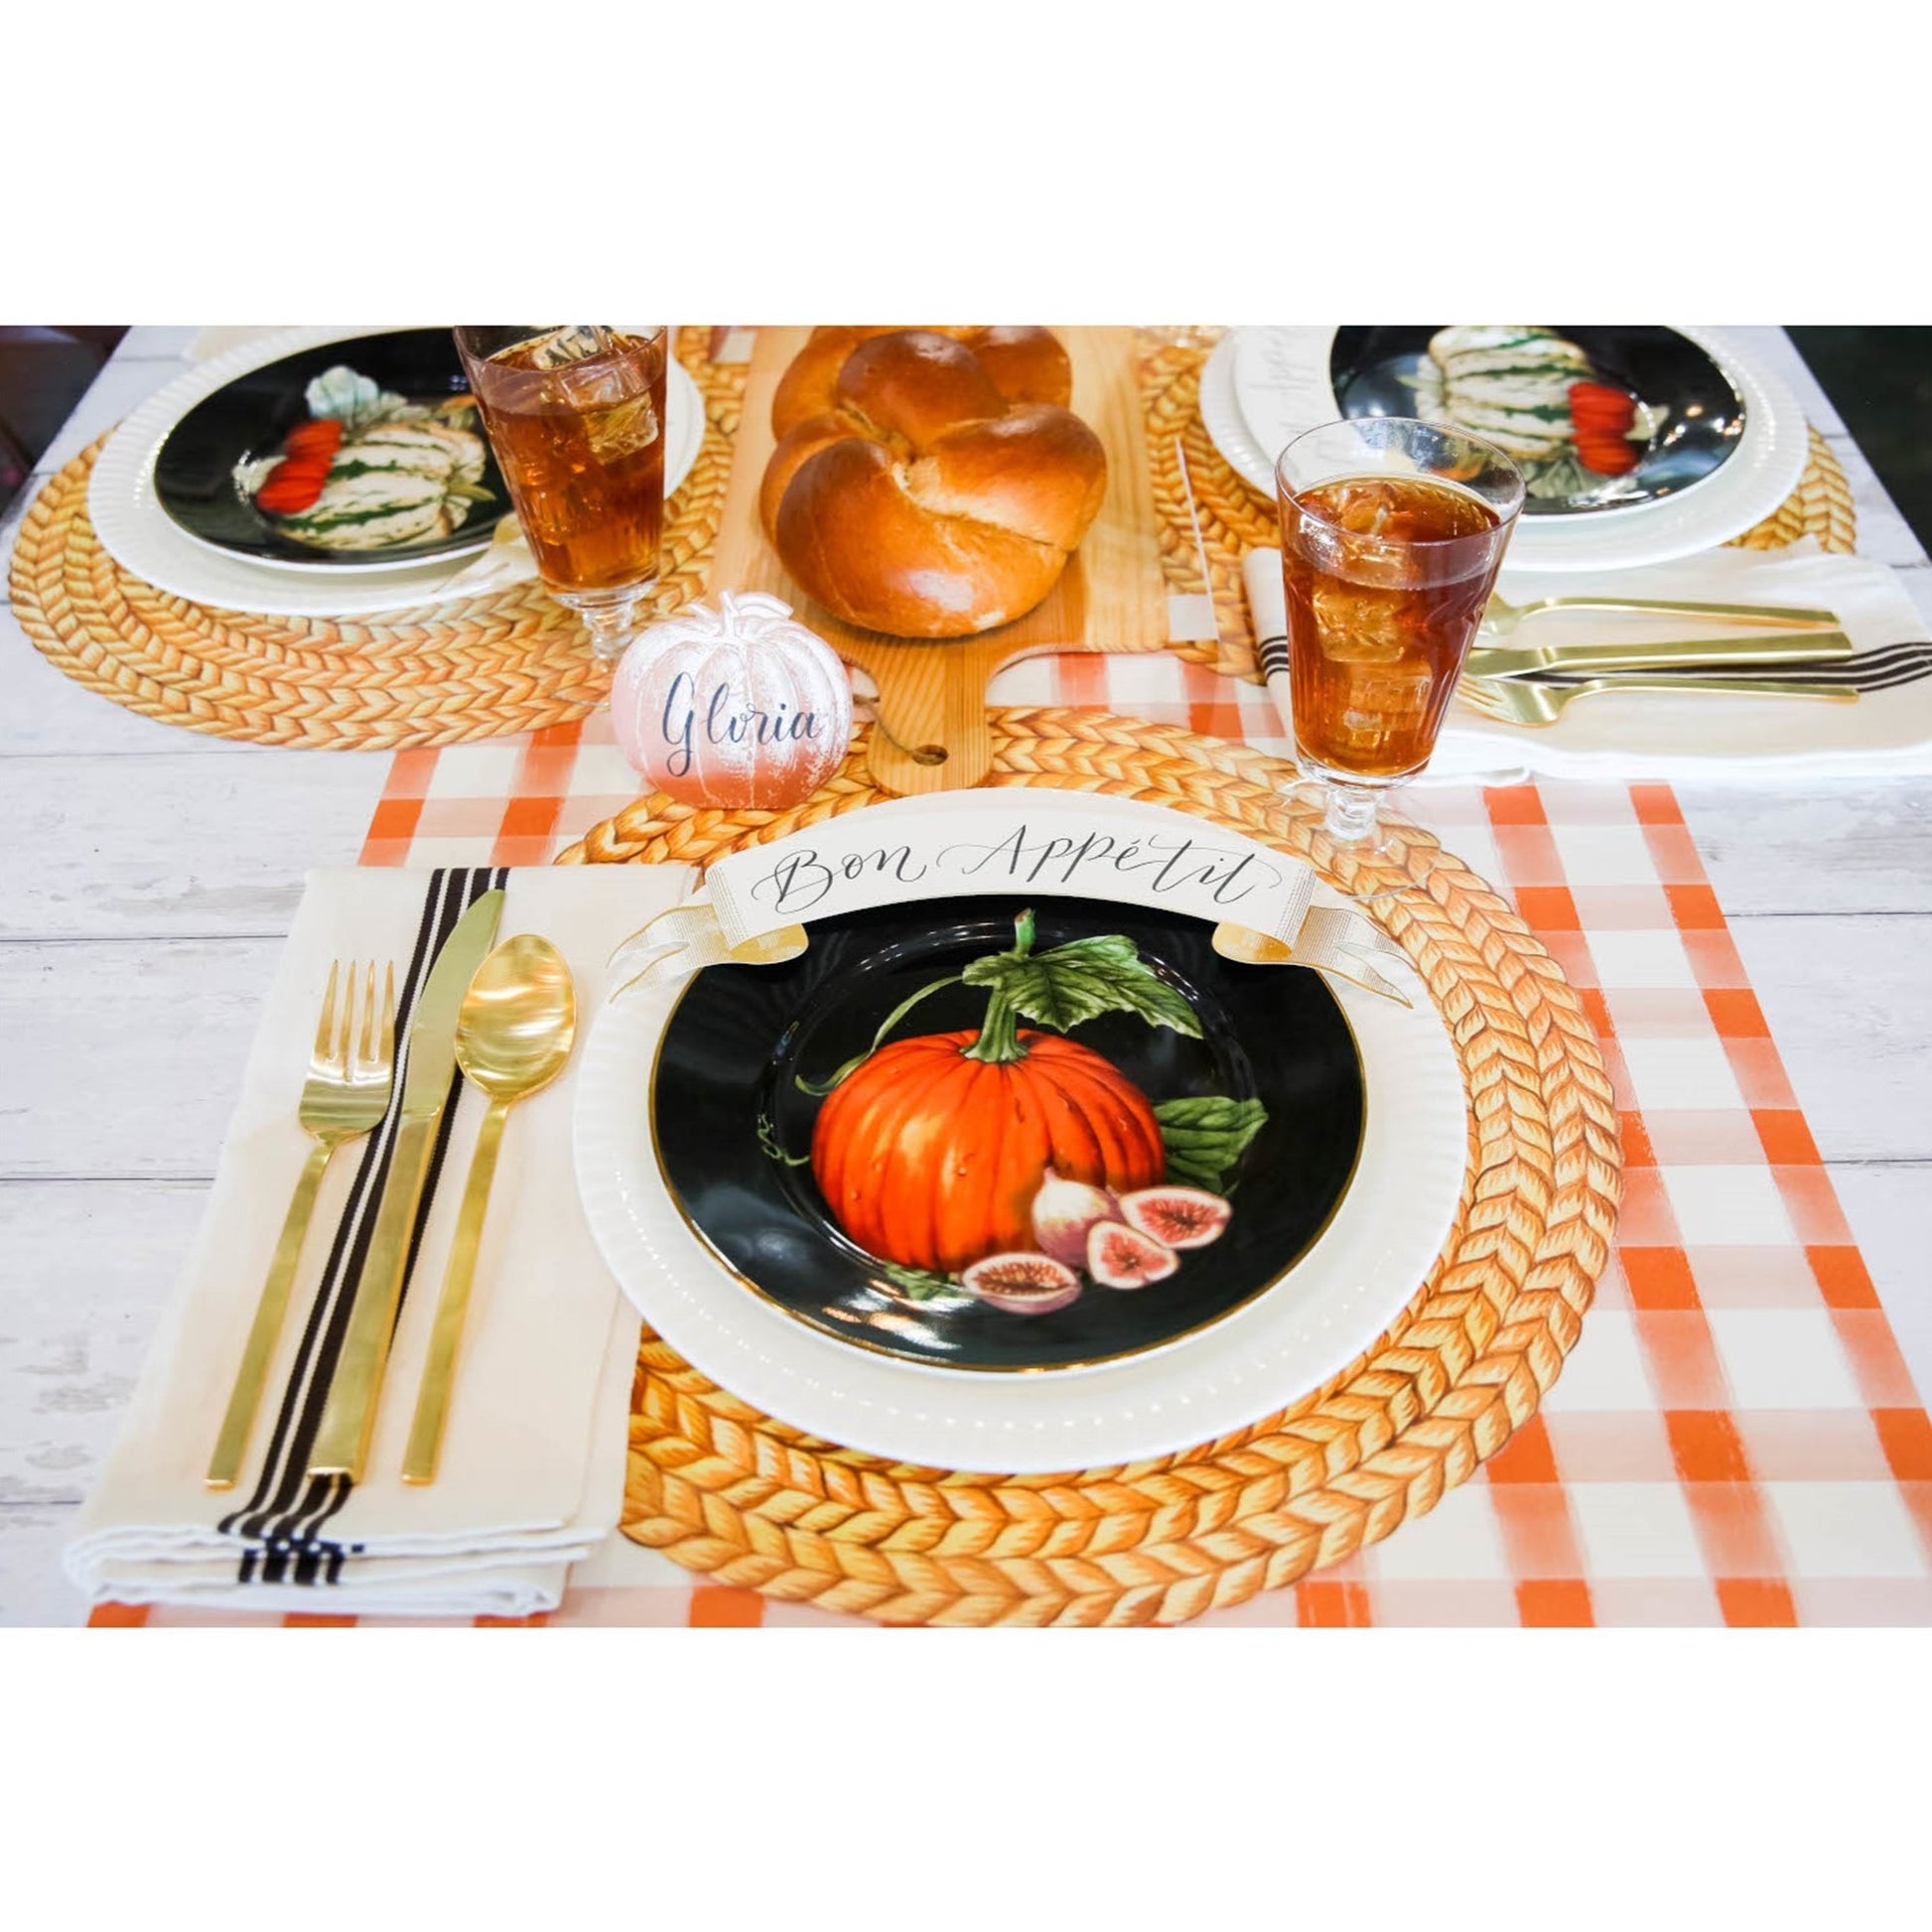 Braided Jute Die Cut Paper Placemat natural color, showing braided texture during a harvest theme